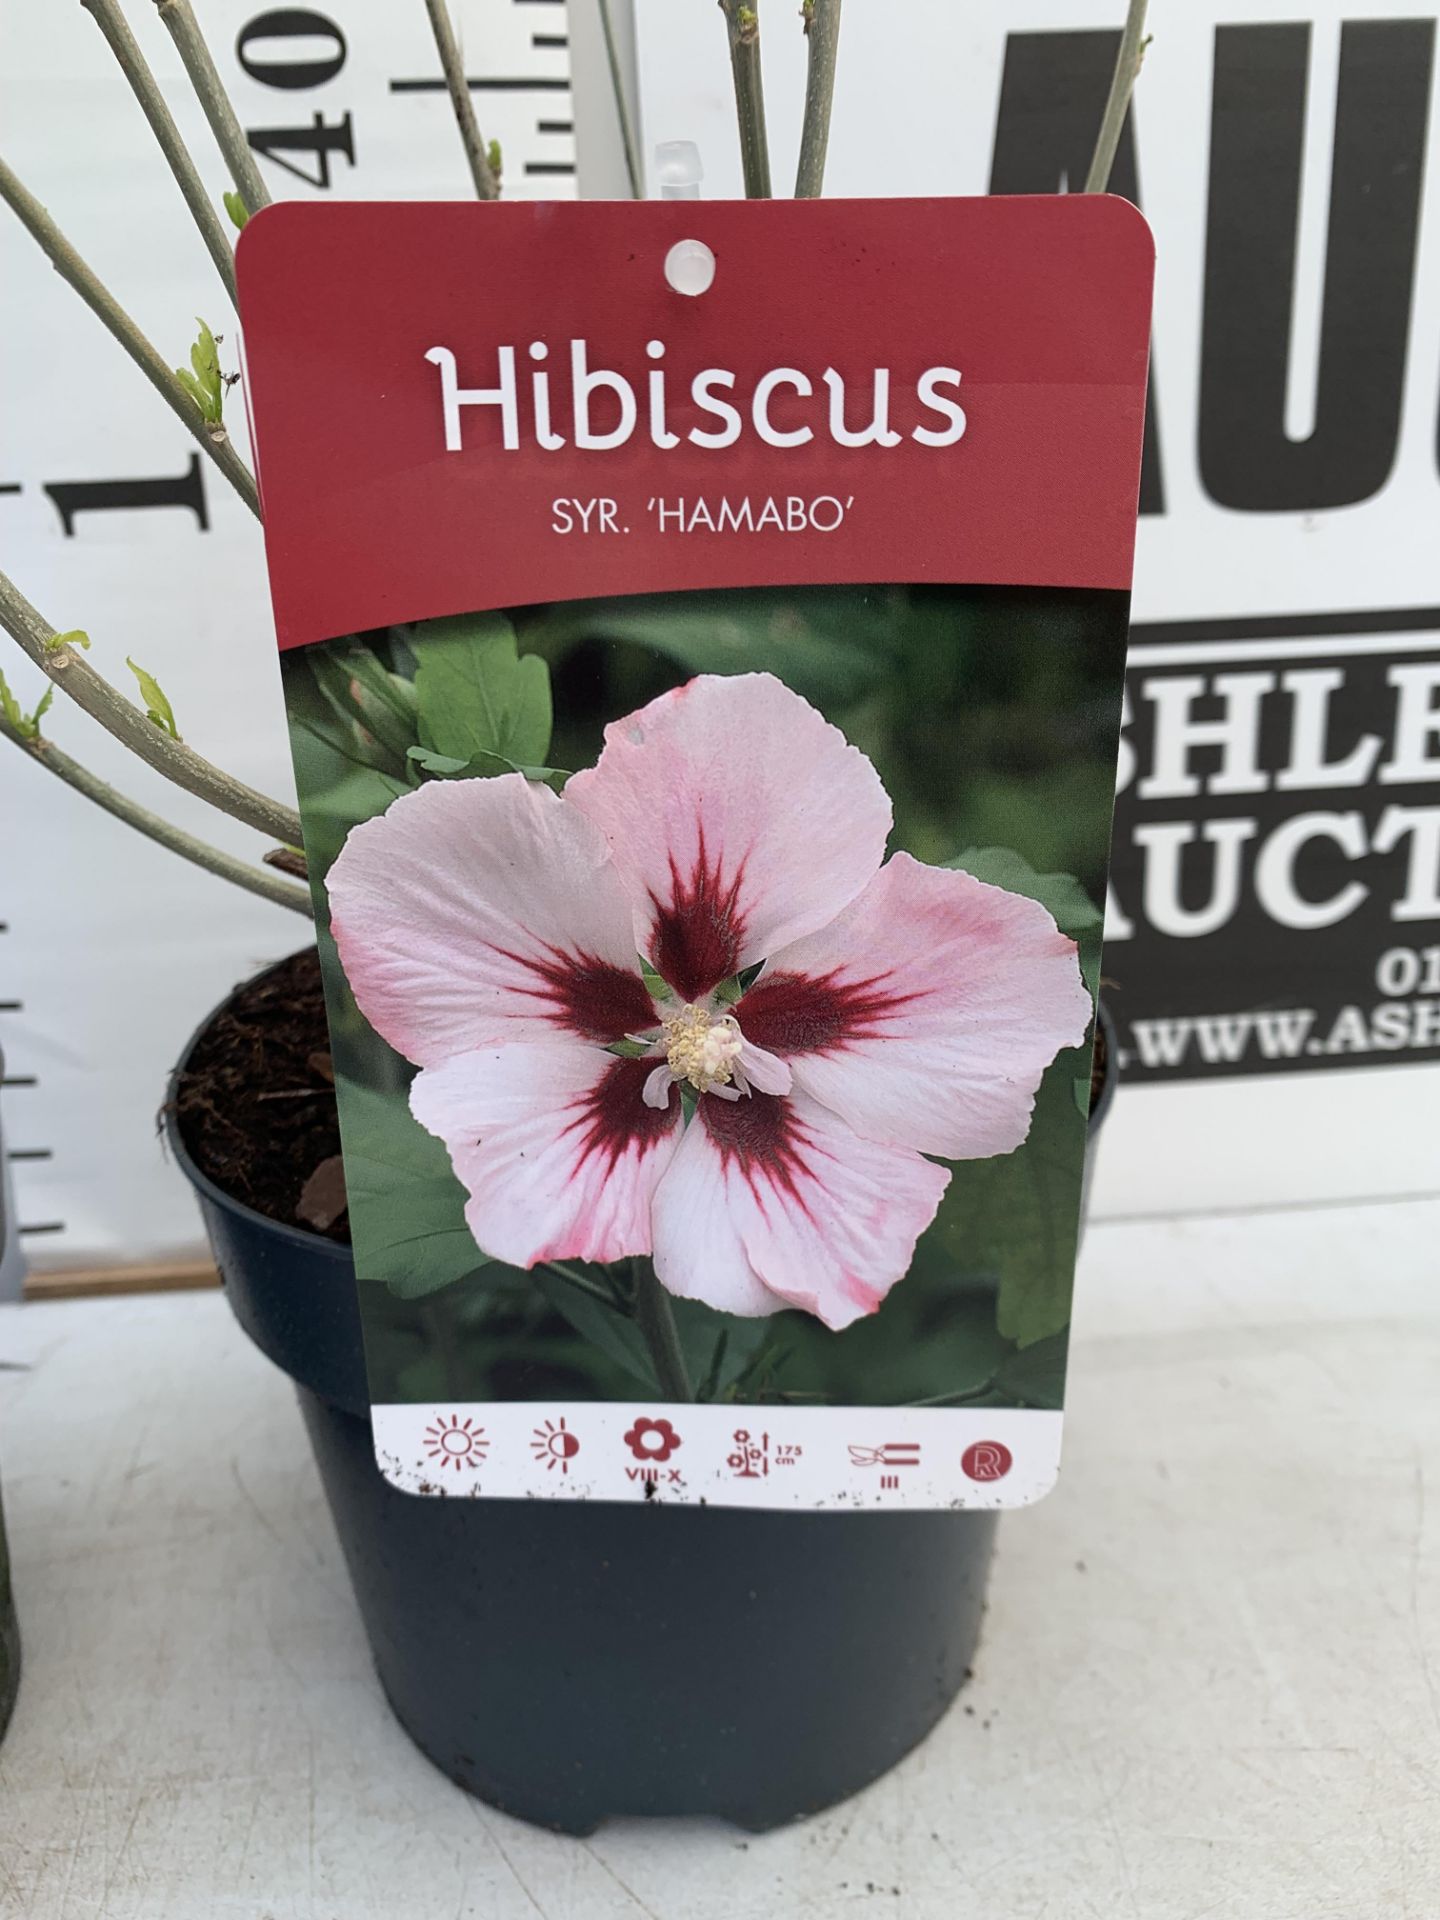 TWO HIBISCUS SYRIACUS DUC DE BRABANT AND HAMABO IN 3 LTR POTS 60CM TALL PLUS VAT TO BE SOLD FOR - Image 7 of 8